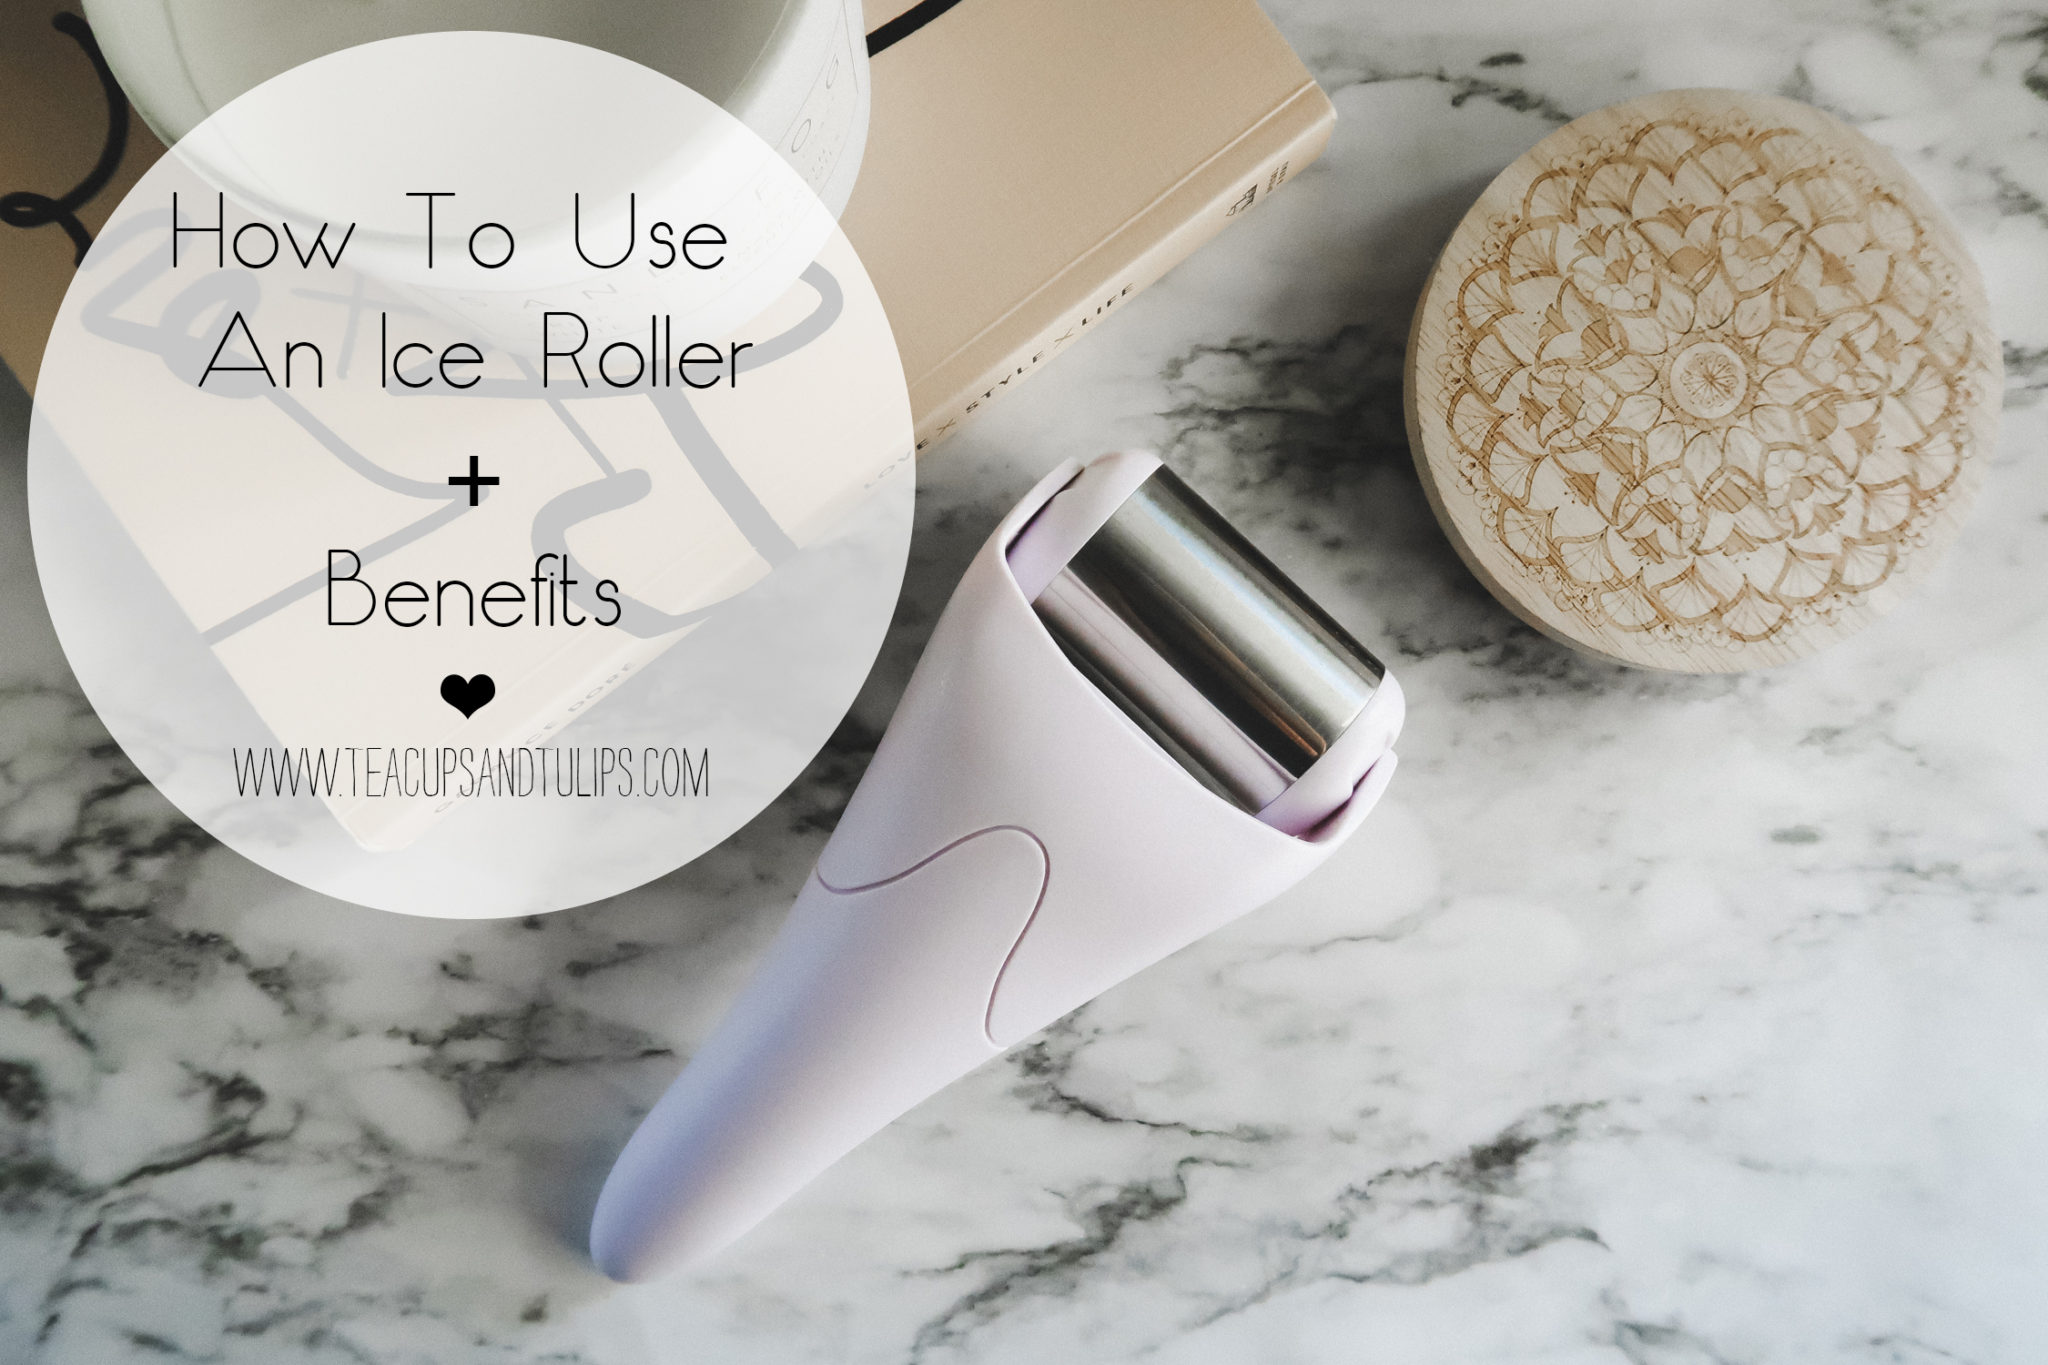 How To Use an Ice Roller, tips featured by top US beauty blog, Tea Cups & Tulips